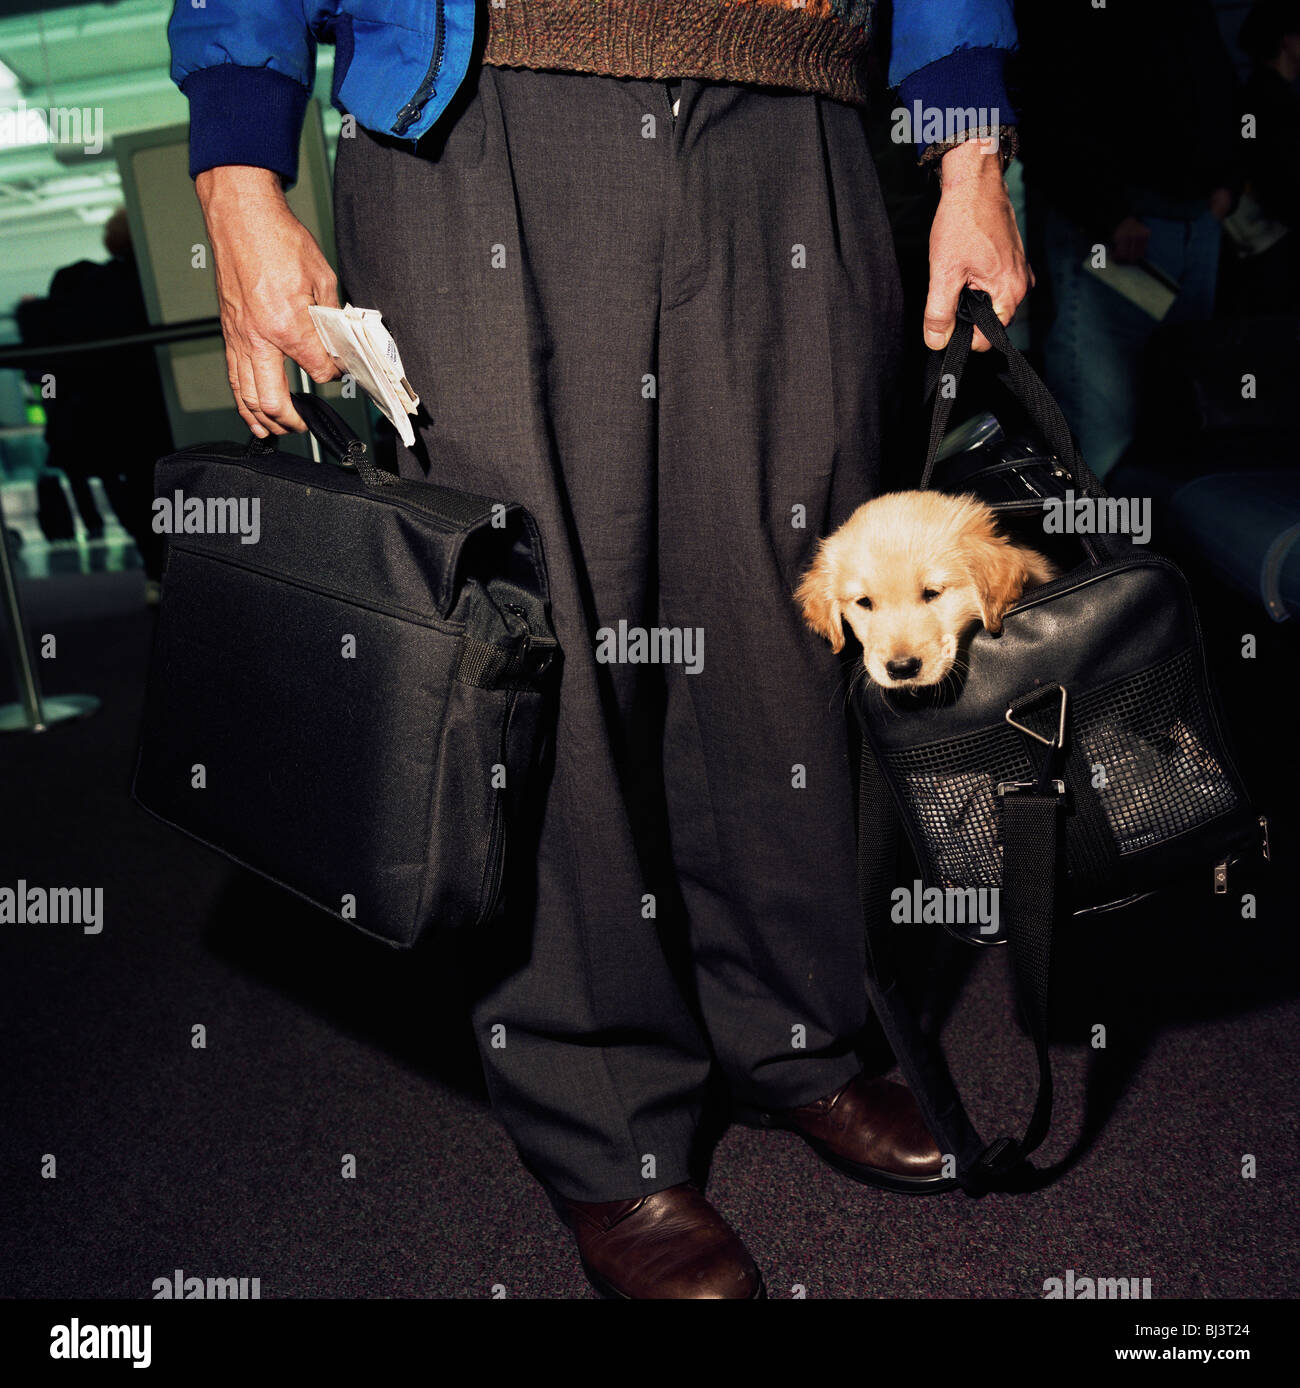 A male passenger from the waste down with a laptop computer in one hand and a Retriever puppy peering out from his owner's bag. Stock Photo